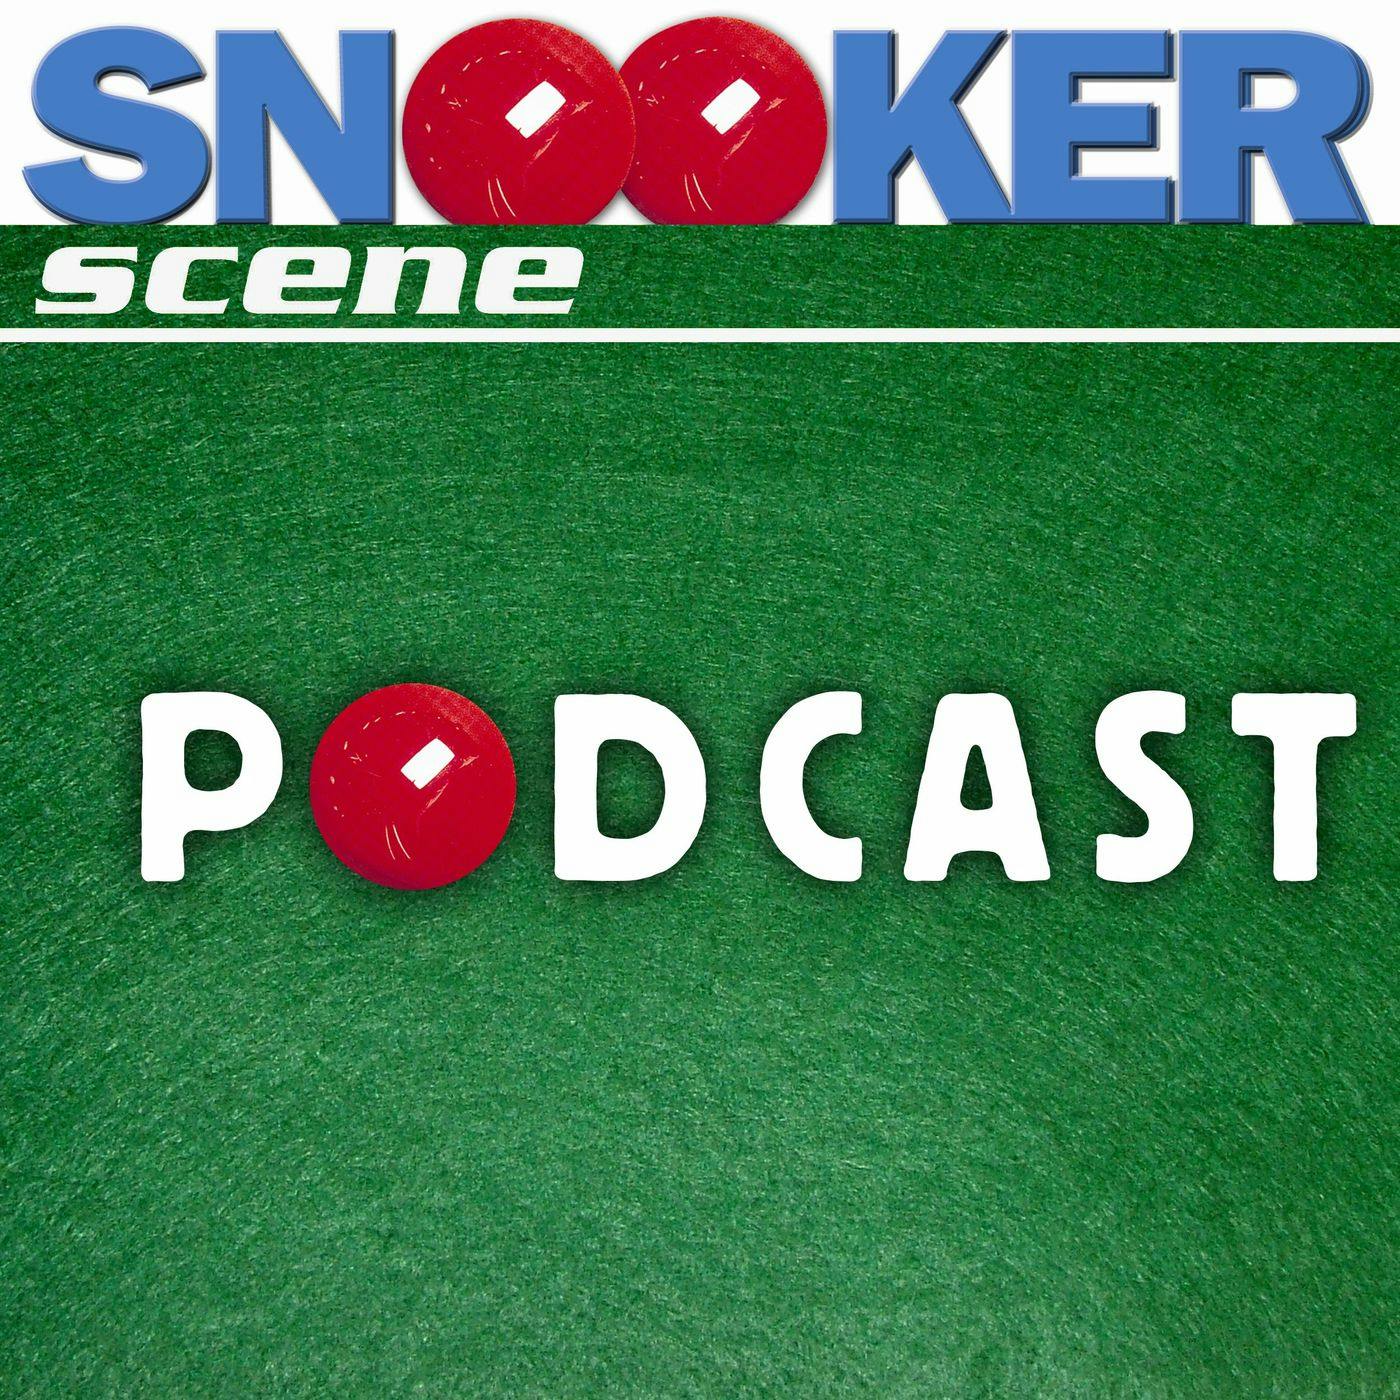 Snooker Scene Podcast episode 83 - The A to Z of snooker continues